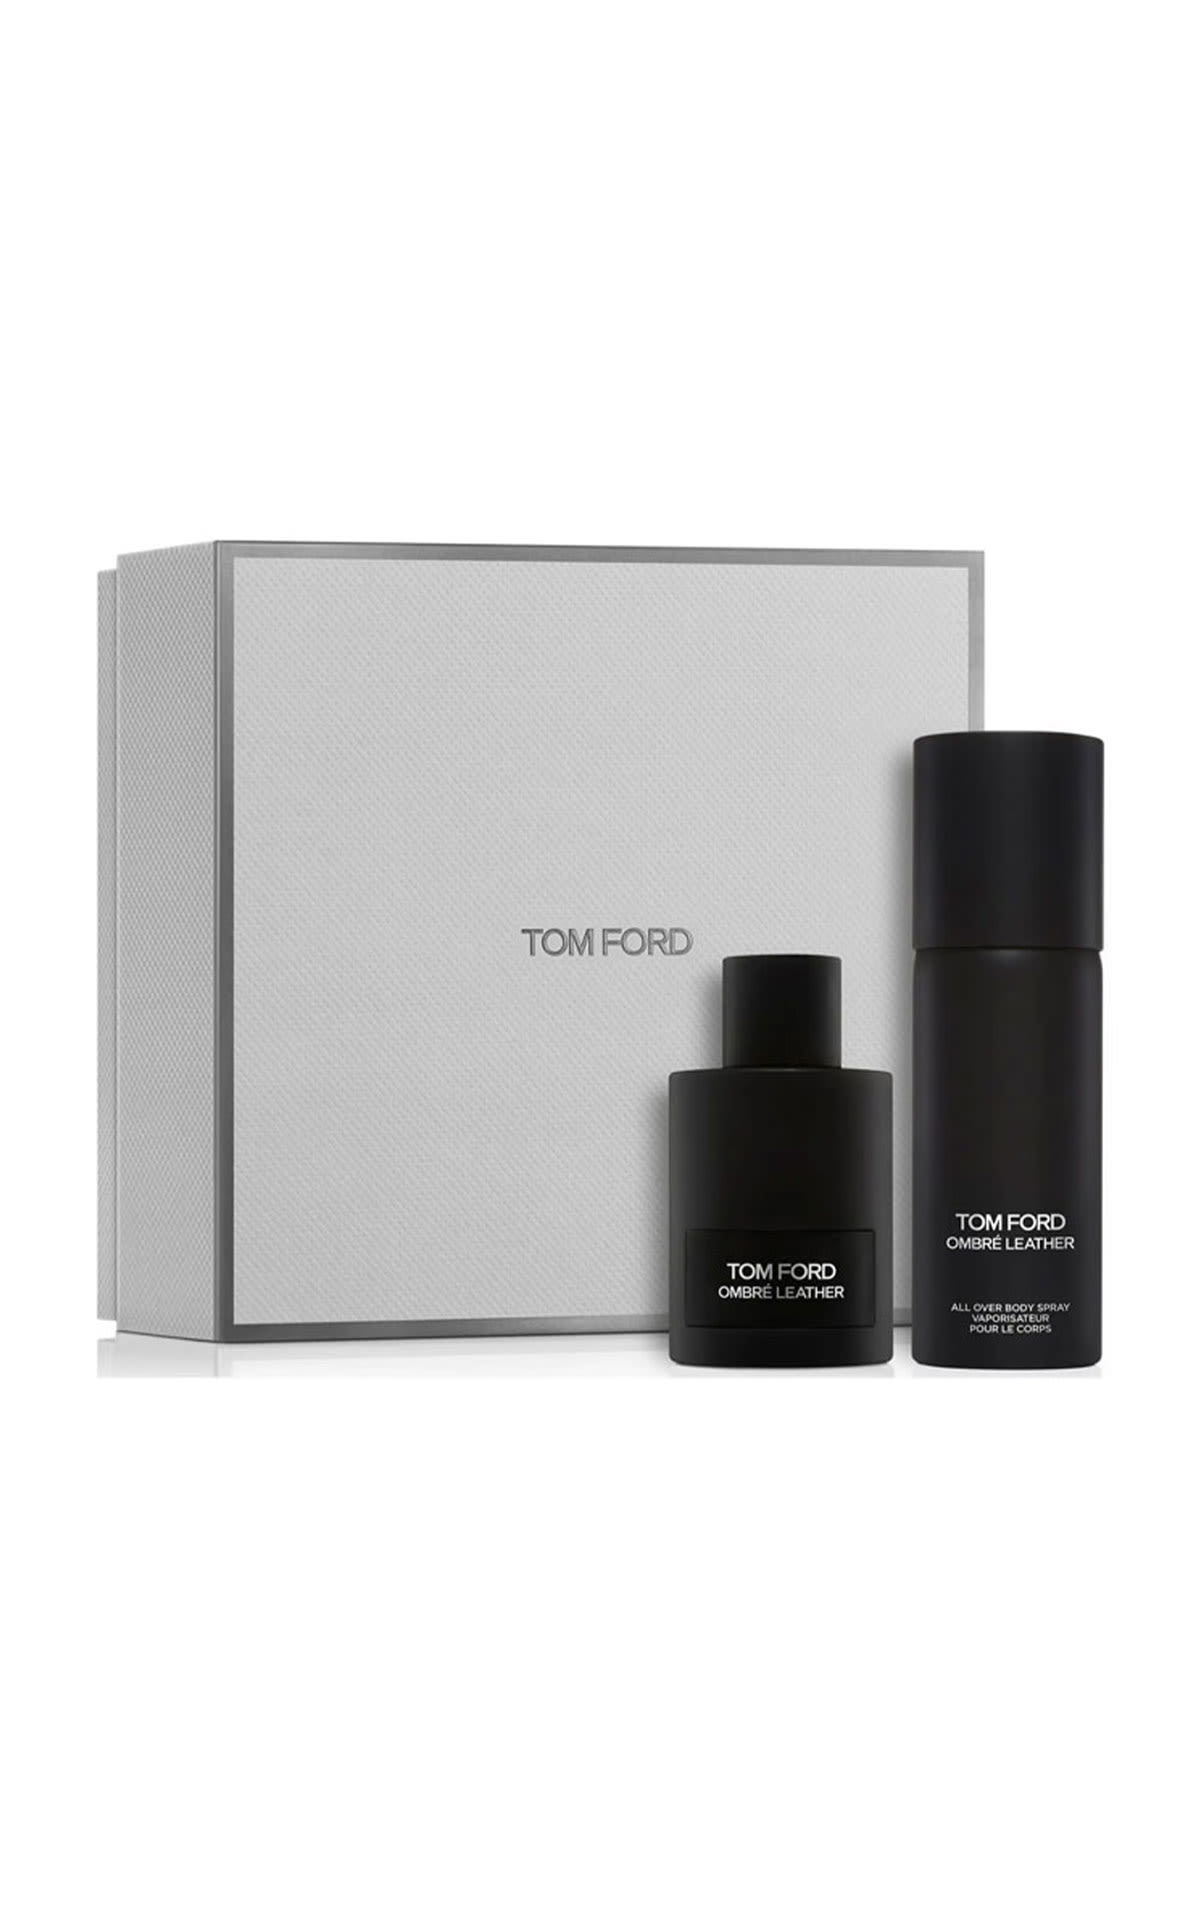 The Cosmetics Company Store Tom Ford Ombre leather eu de parfum set from Bicester Village